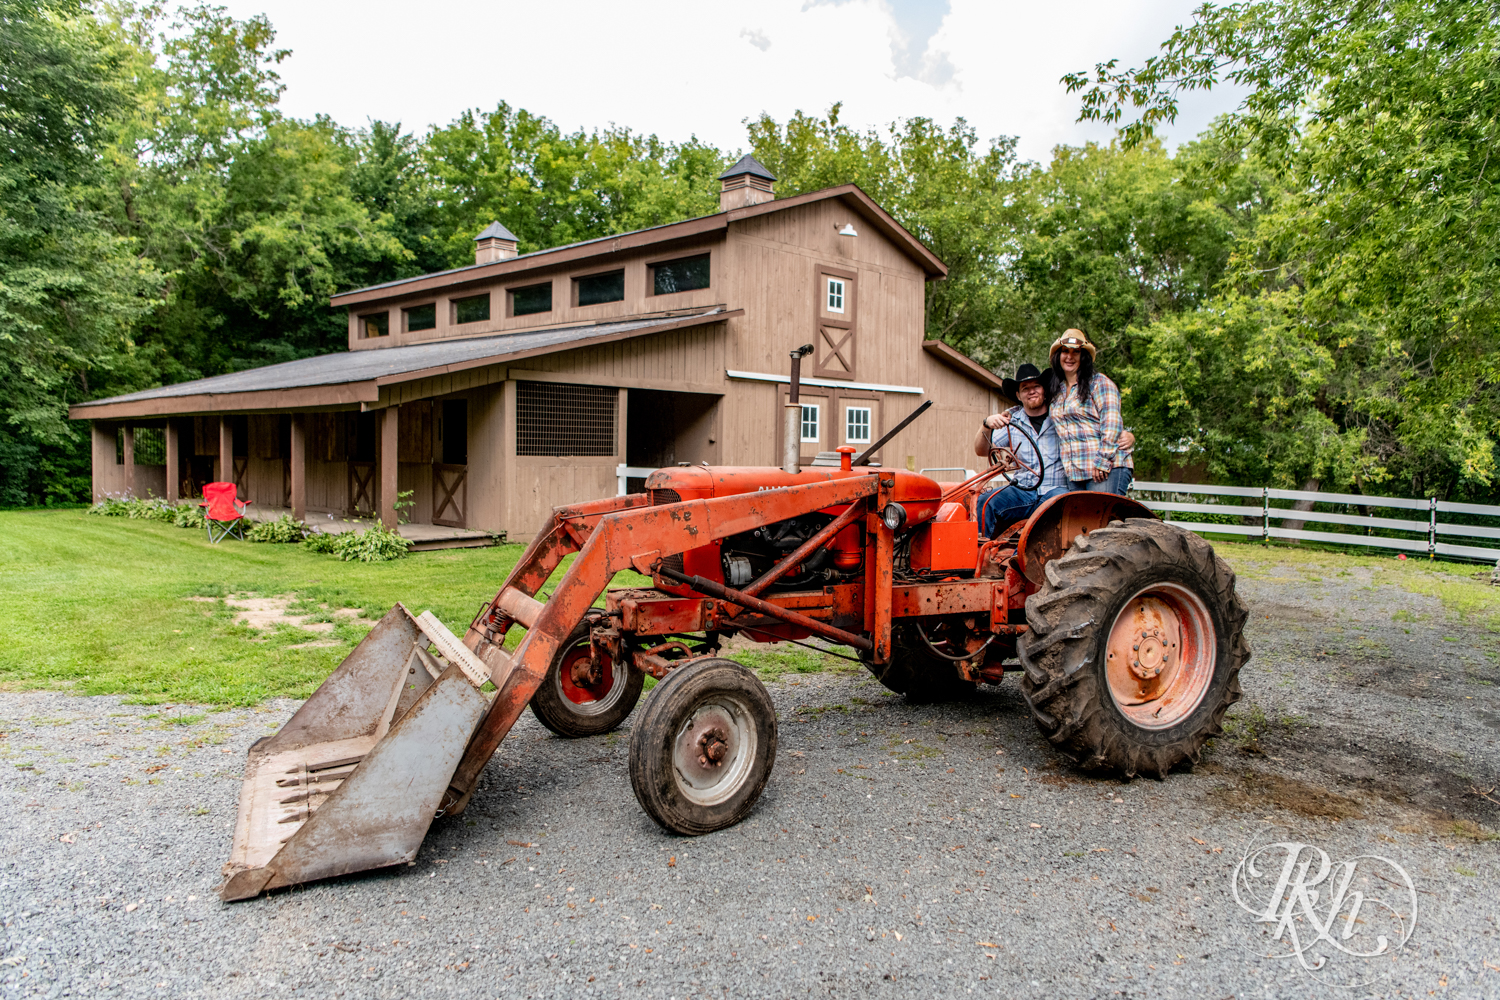 Lebanese woman and man in cowboy hats smile on tractor at their horse farm in Chisago City, Minnesota.